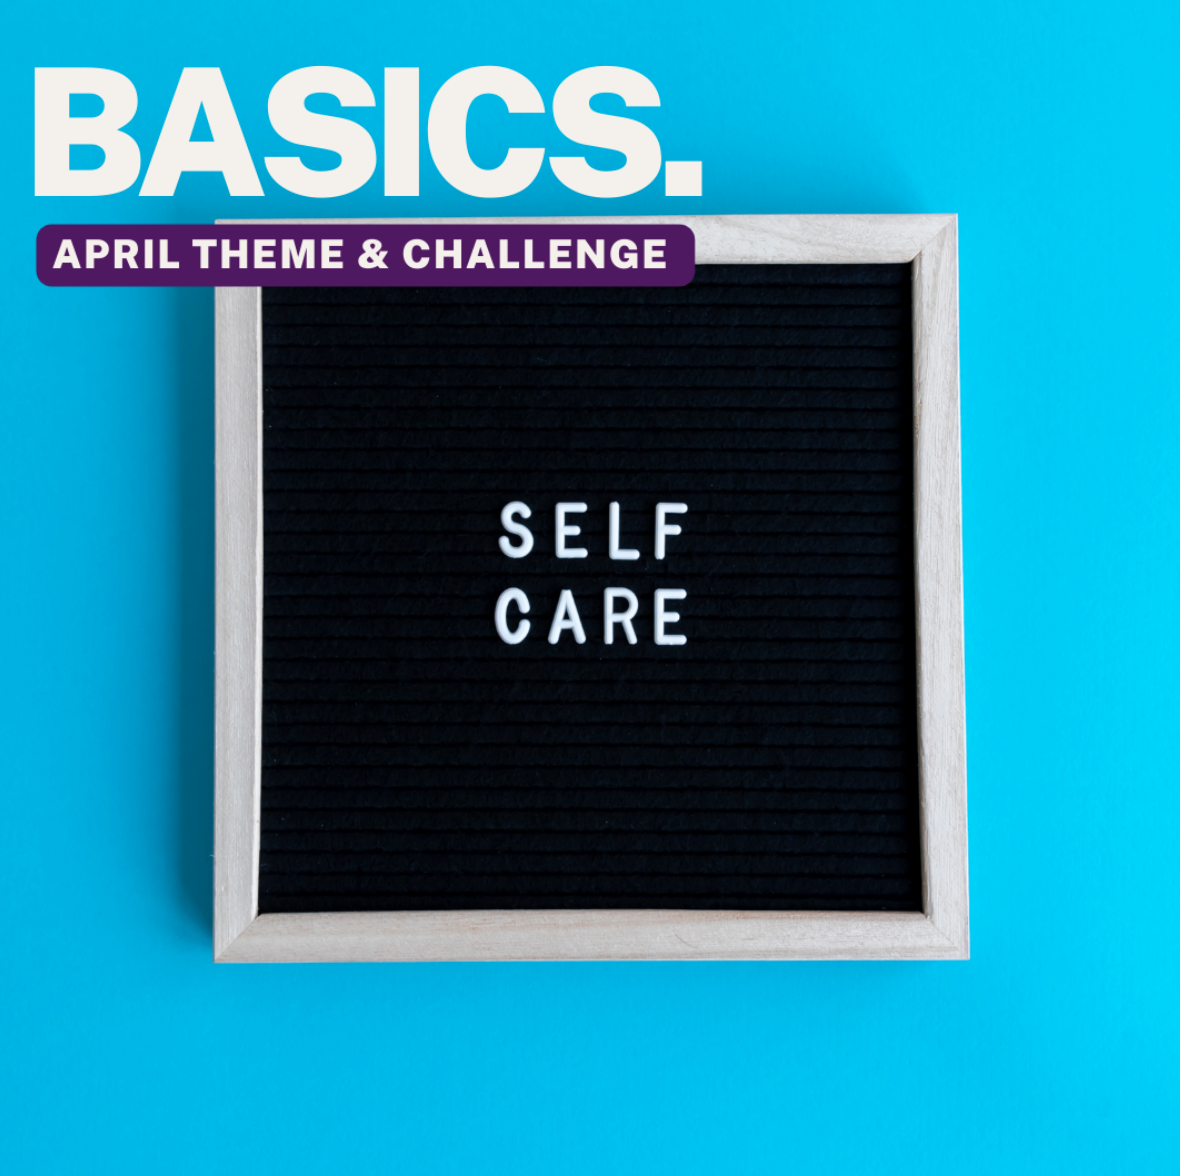 Your baseline self-care 3/31